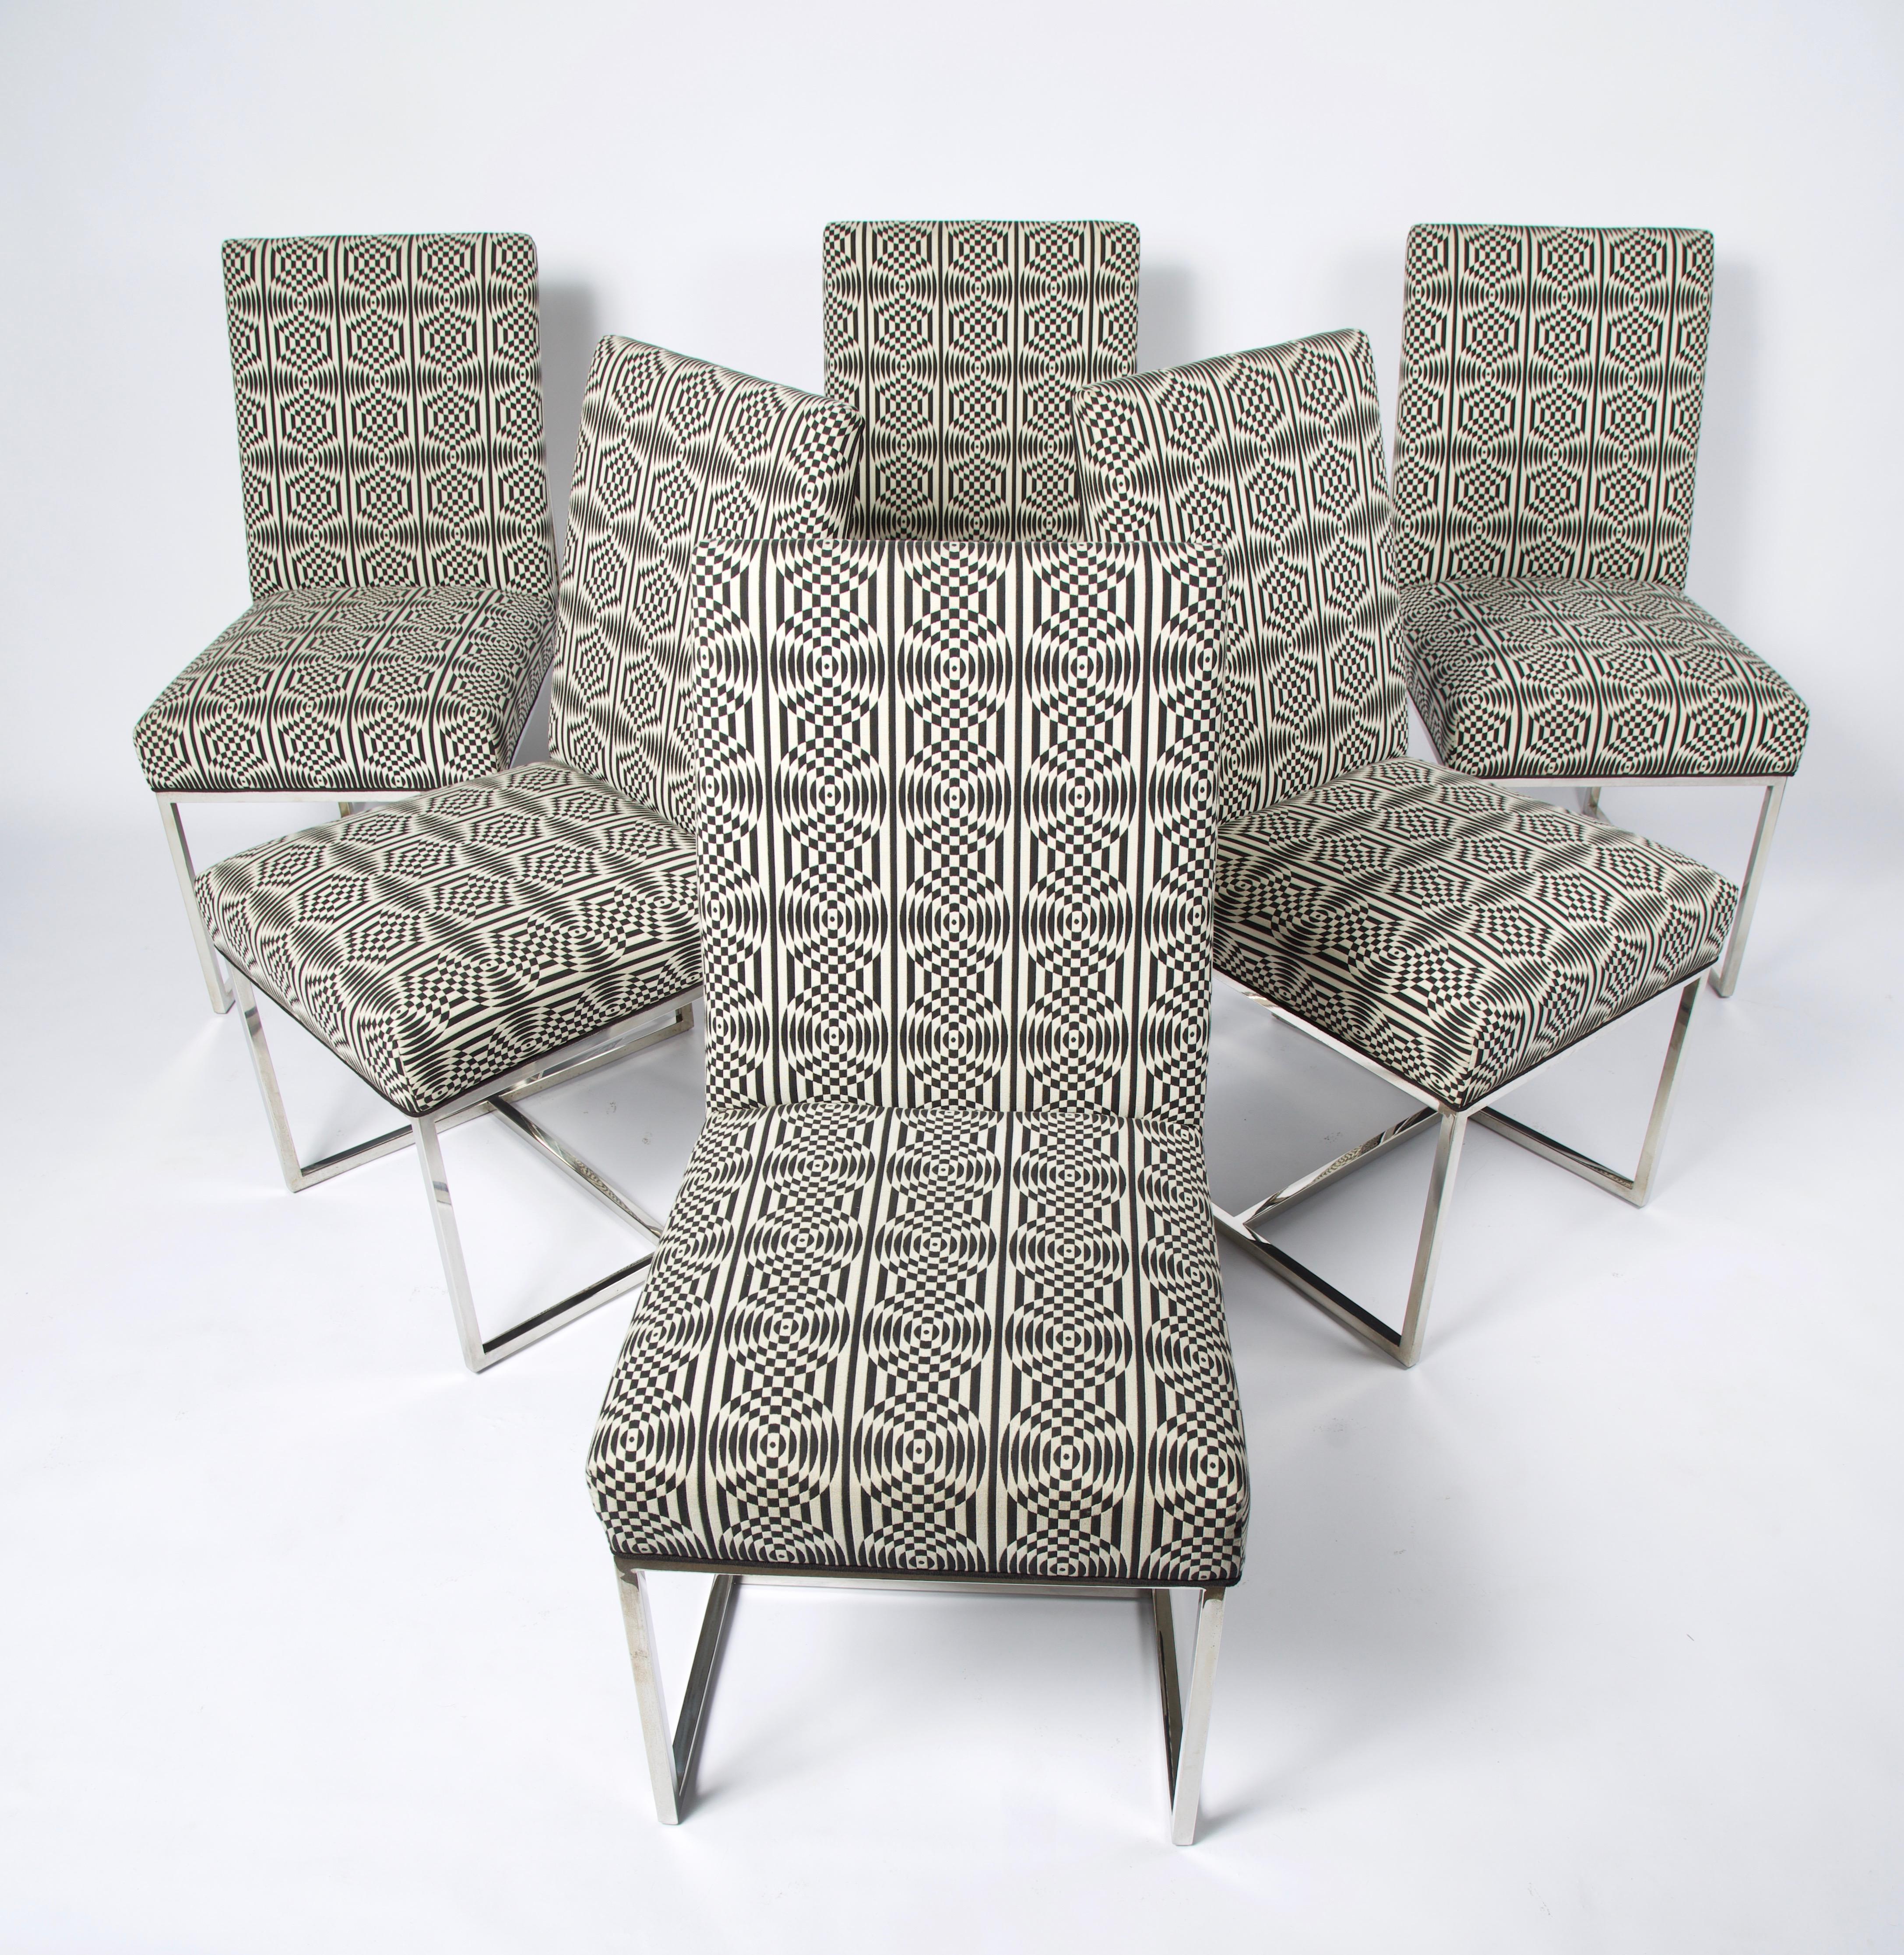 Set of 6 Mid-Century Modern dinning chairs in the manner of the iconic thin-line dining chairs in the style of Milo Baughman for Thayer Coggin. Newly upholstered in an abstract circular and geometric striped fabric.
 